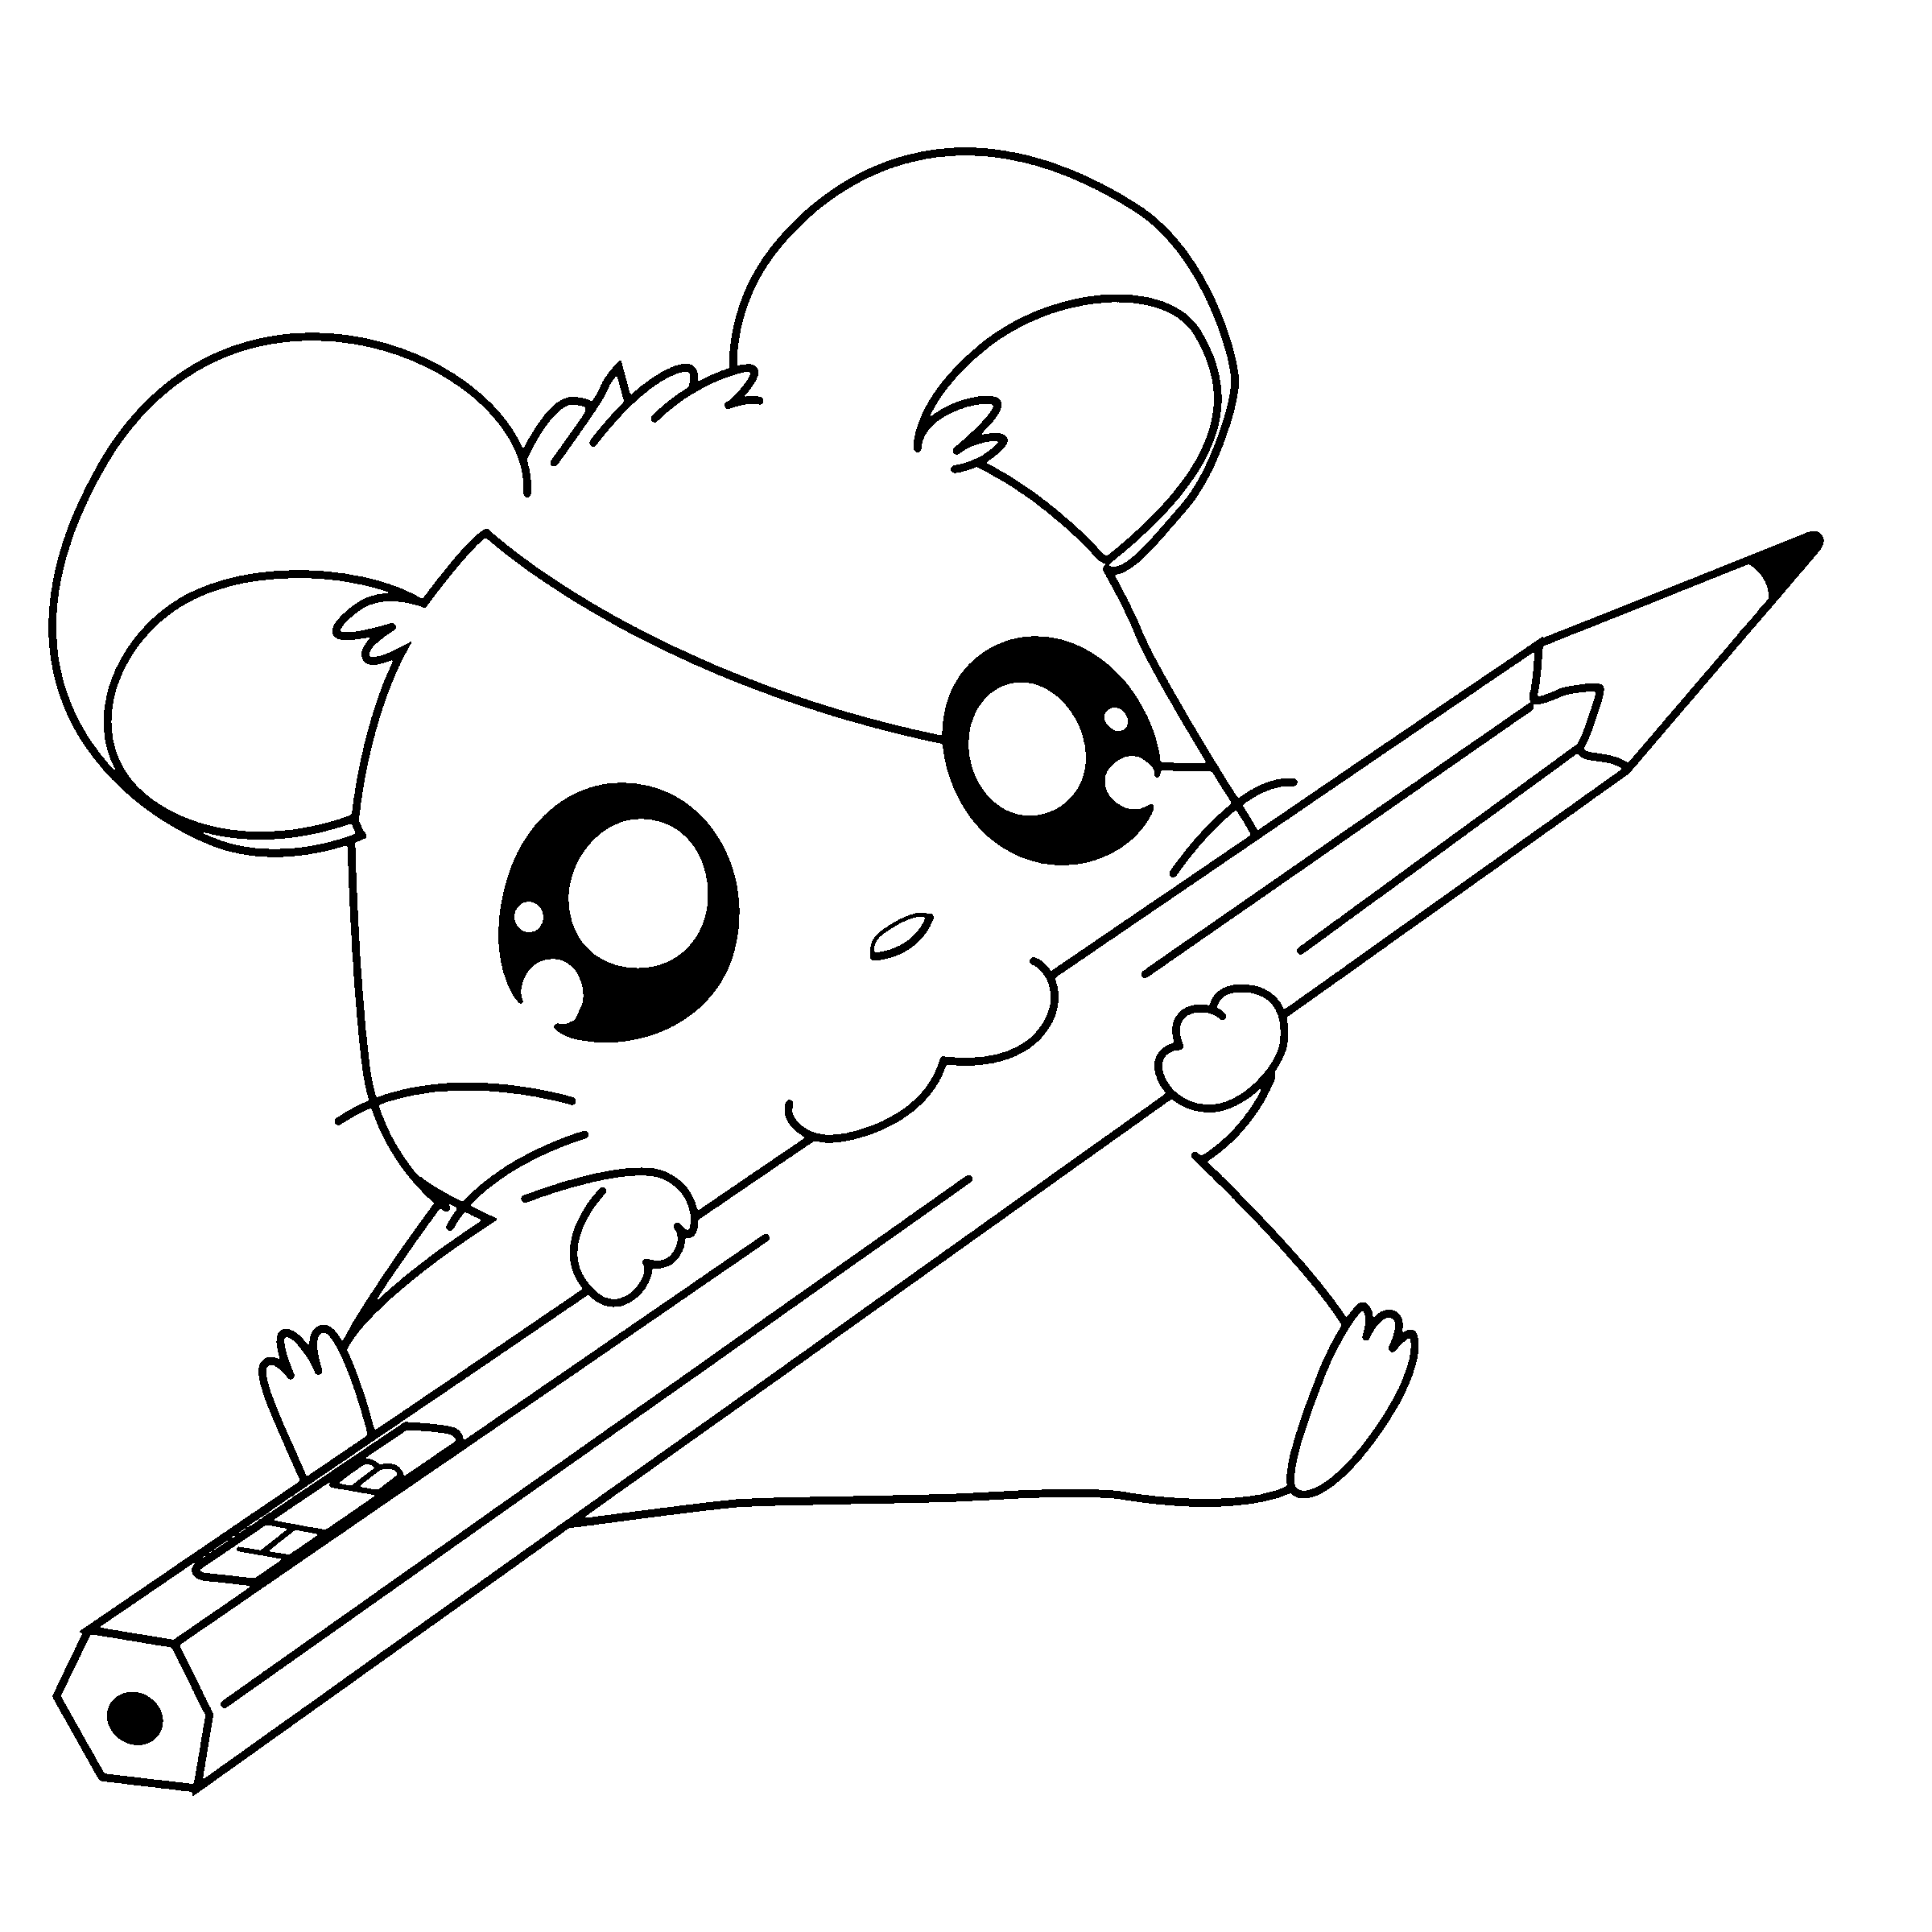 Anime Animals Coloring Pages For Adults - Coloring Home